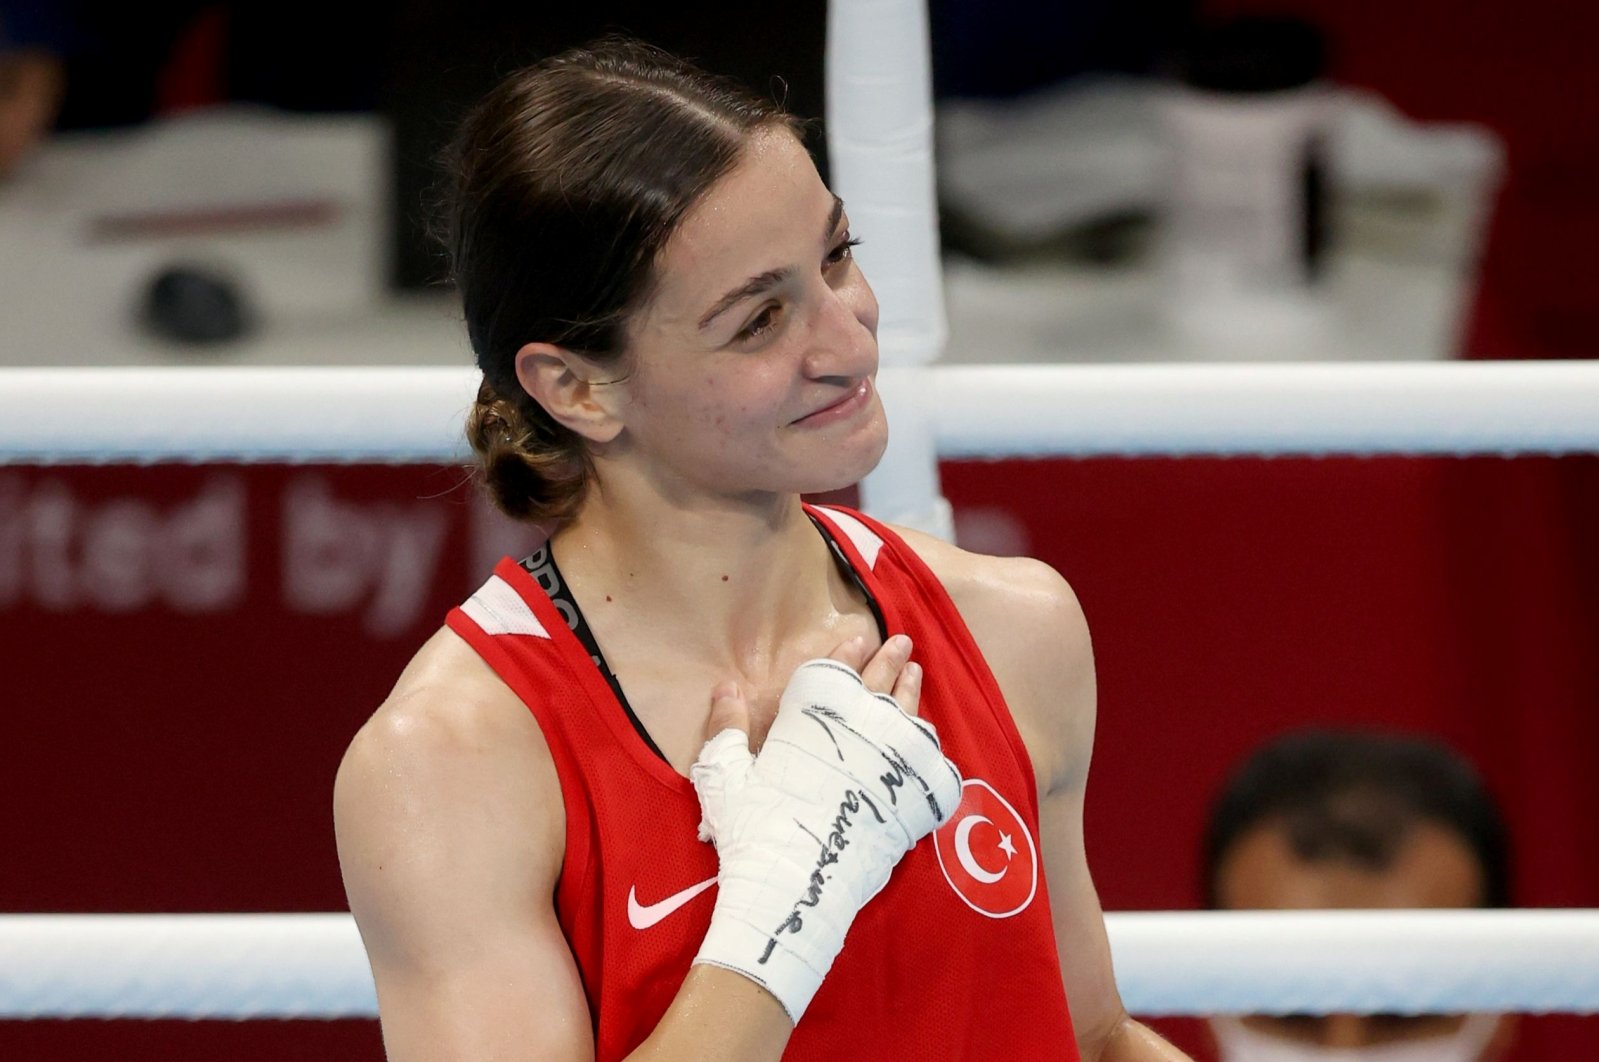 Turkey's Buse Naz Çakıroğlu celebrates after winning against Chinese Taipei's Huang Hsiao-Wen in the women's flyweight boxing semifinal at the Tokyo 2020 Olympic Games at the Kokugikan Arena, Tokyo, Japan, Aug. 4, 2021. (Reuters Photo)